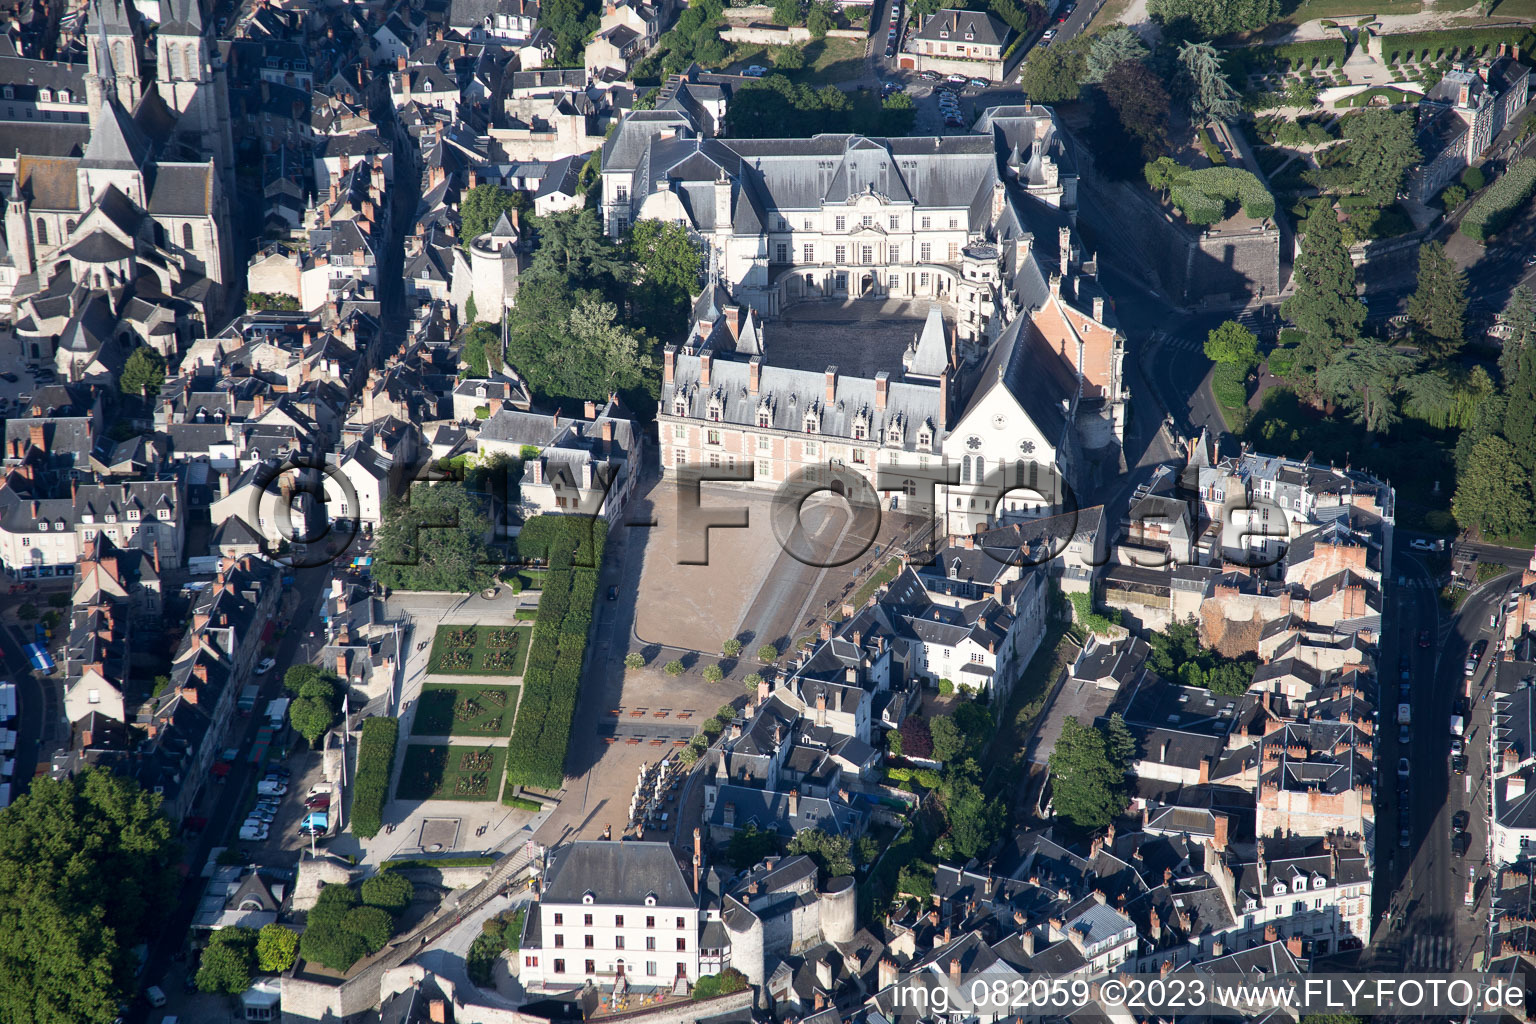 Blois in the state Loir et Cher, France from a drone